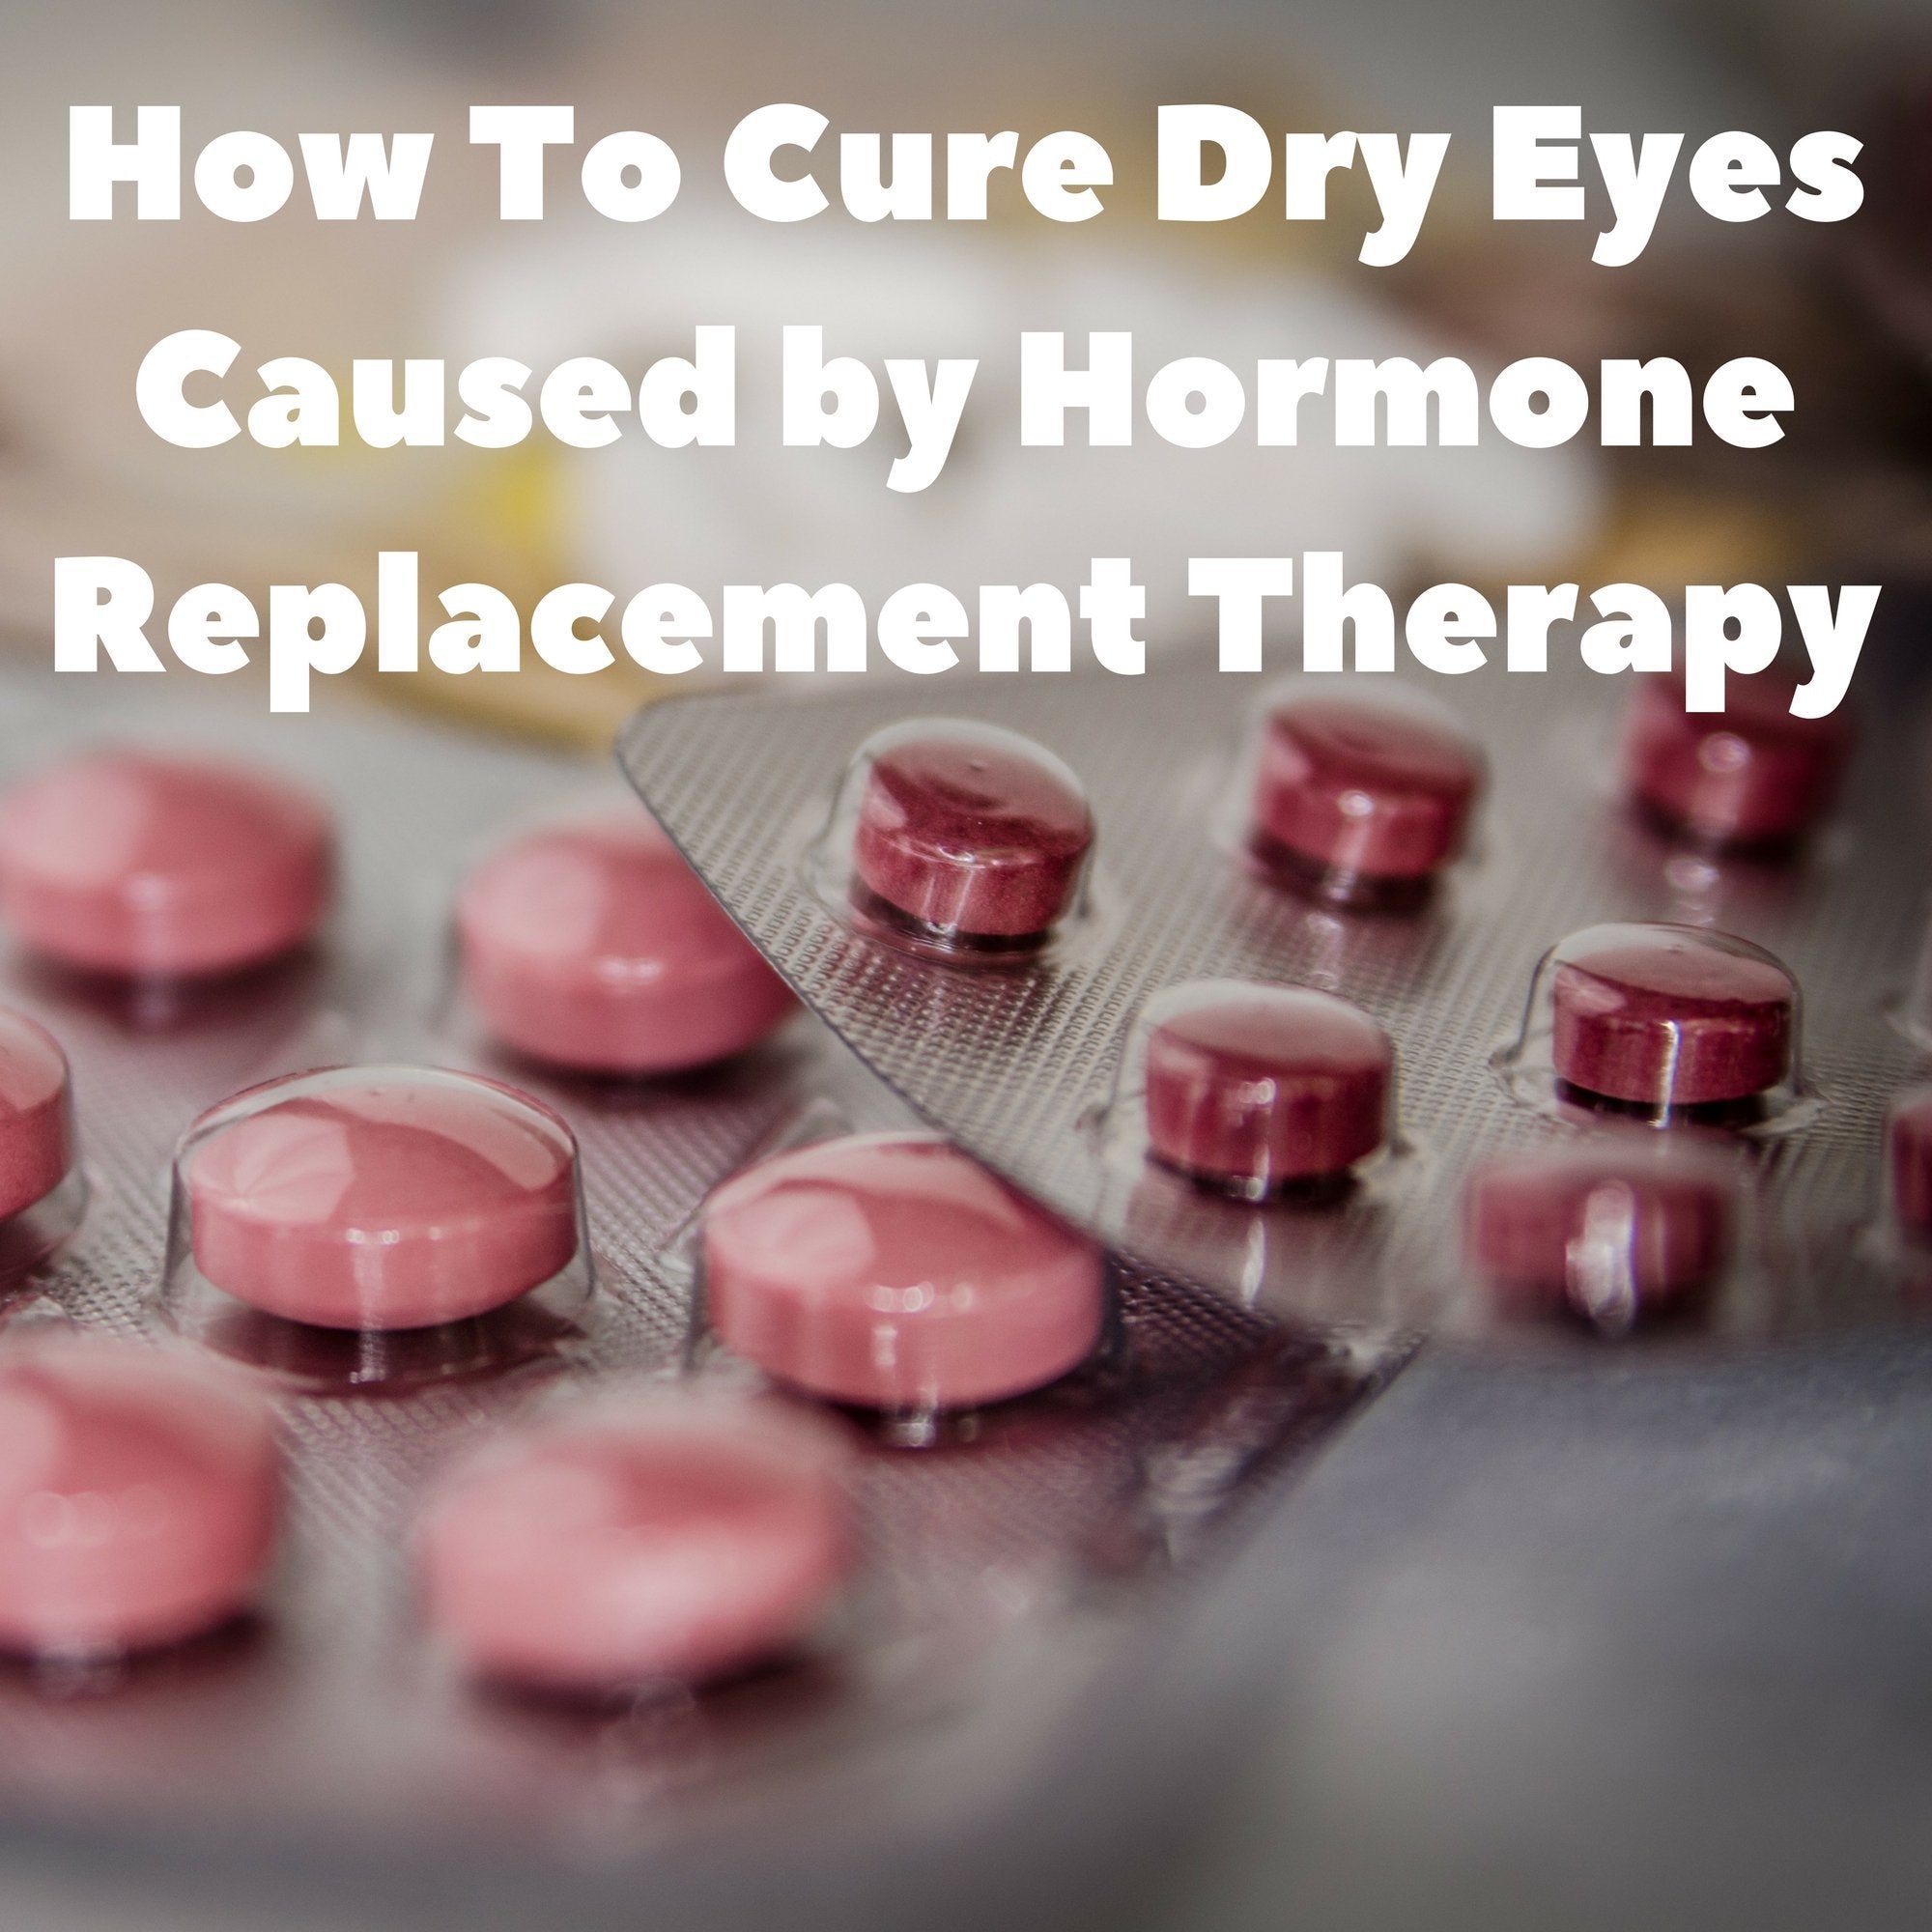 How to Cure Dry Eyes Caused by Hormone Replacement Therapy